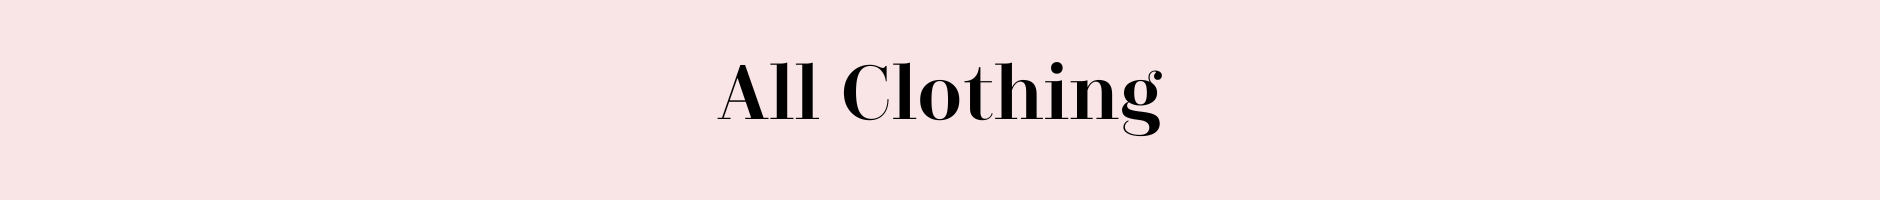 clothing-1.png